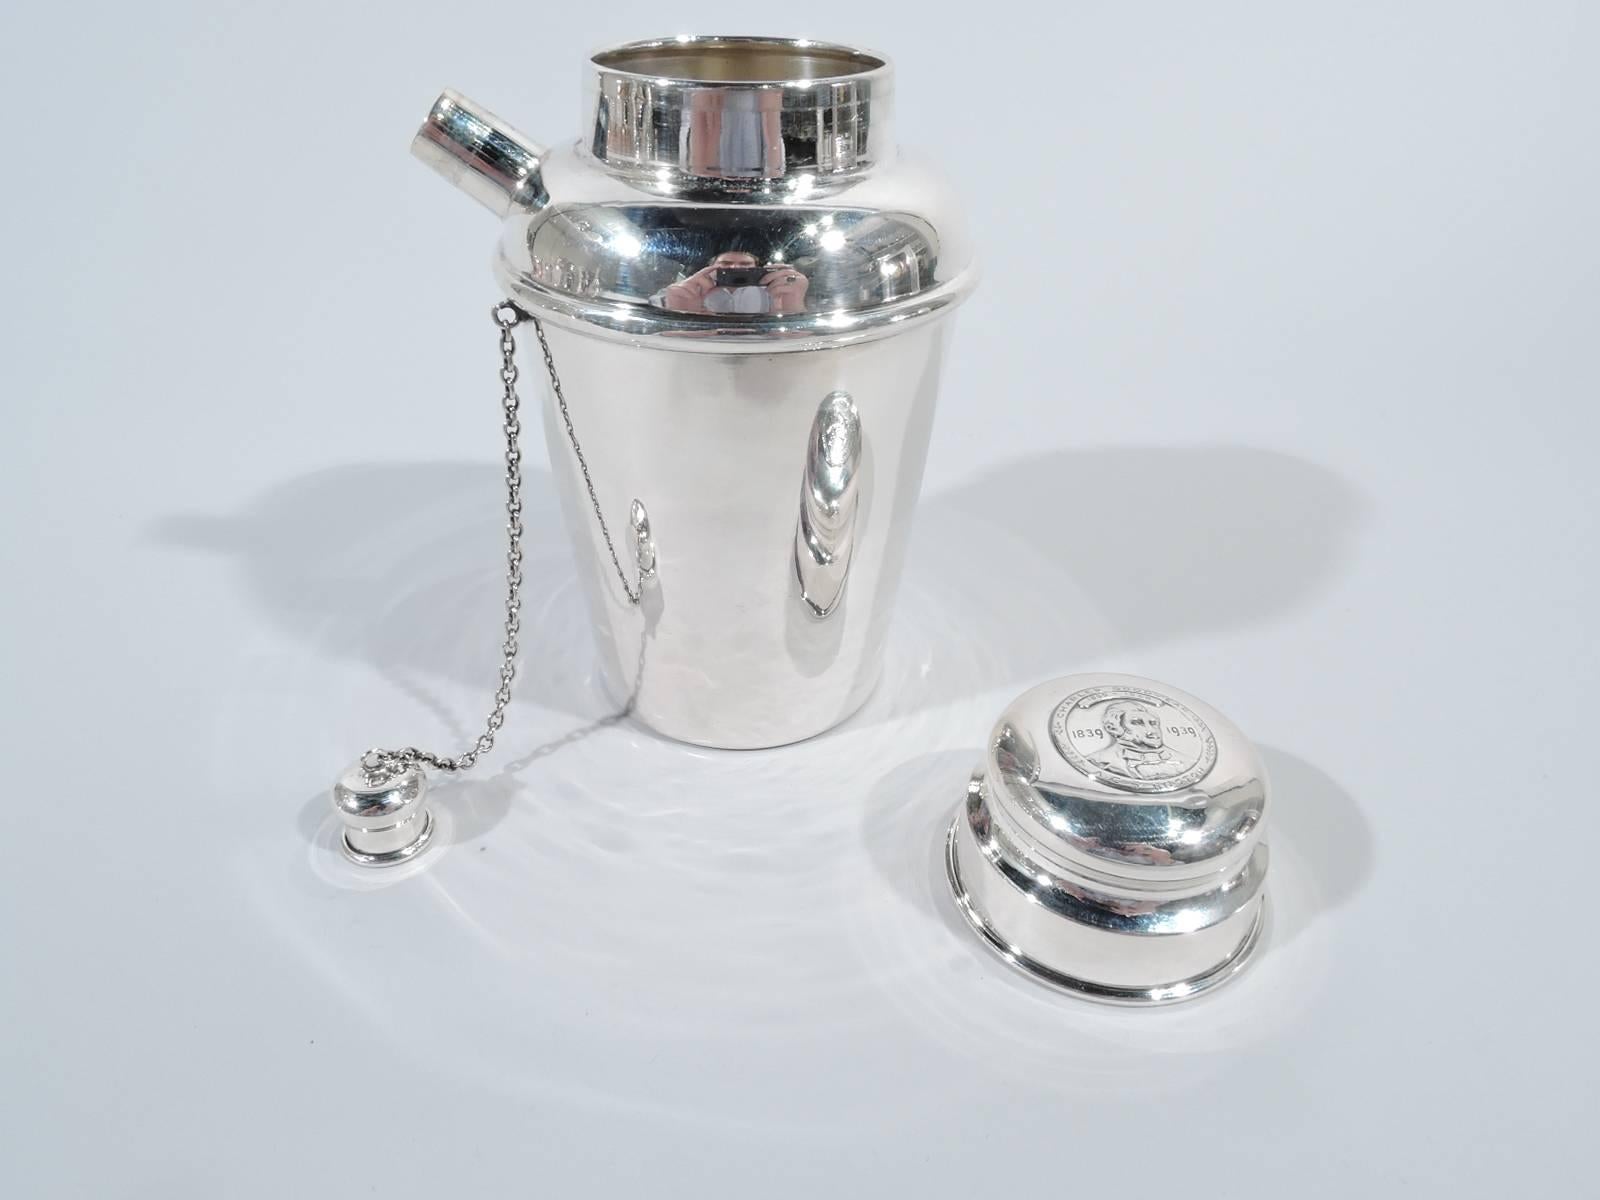 Midcentury sterling silver mini martini shaker. Made by Reed & Barton in Taunton, Mass. Straight and tapering bowl, curved shoulders, stubby diagonal spout with built-in strainer and chained and snug-fitting cap, and short neck with cover. On cover